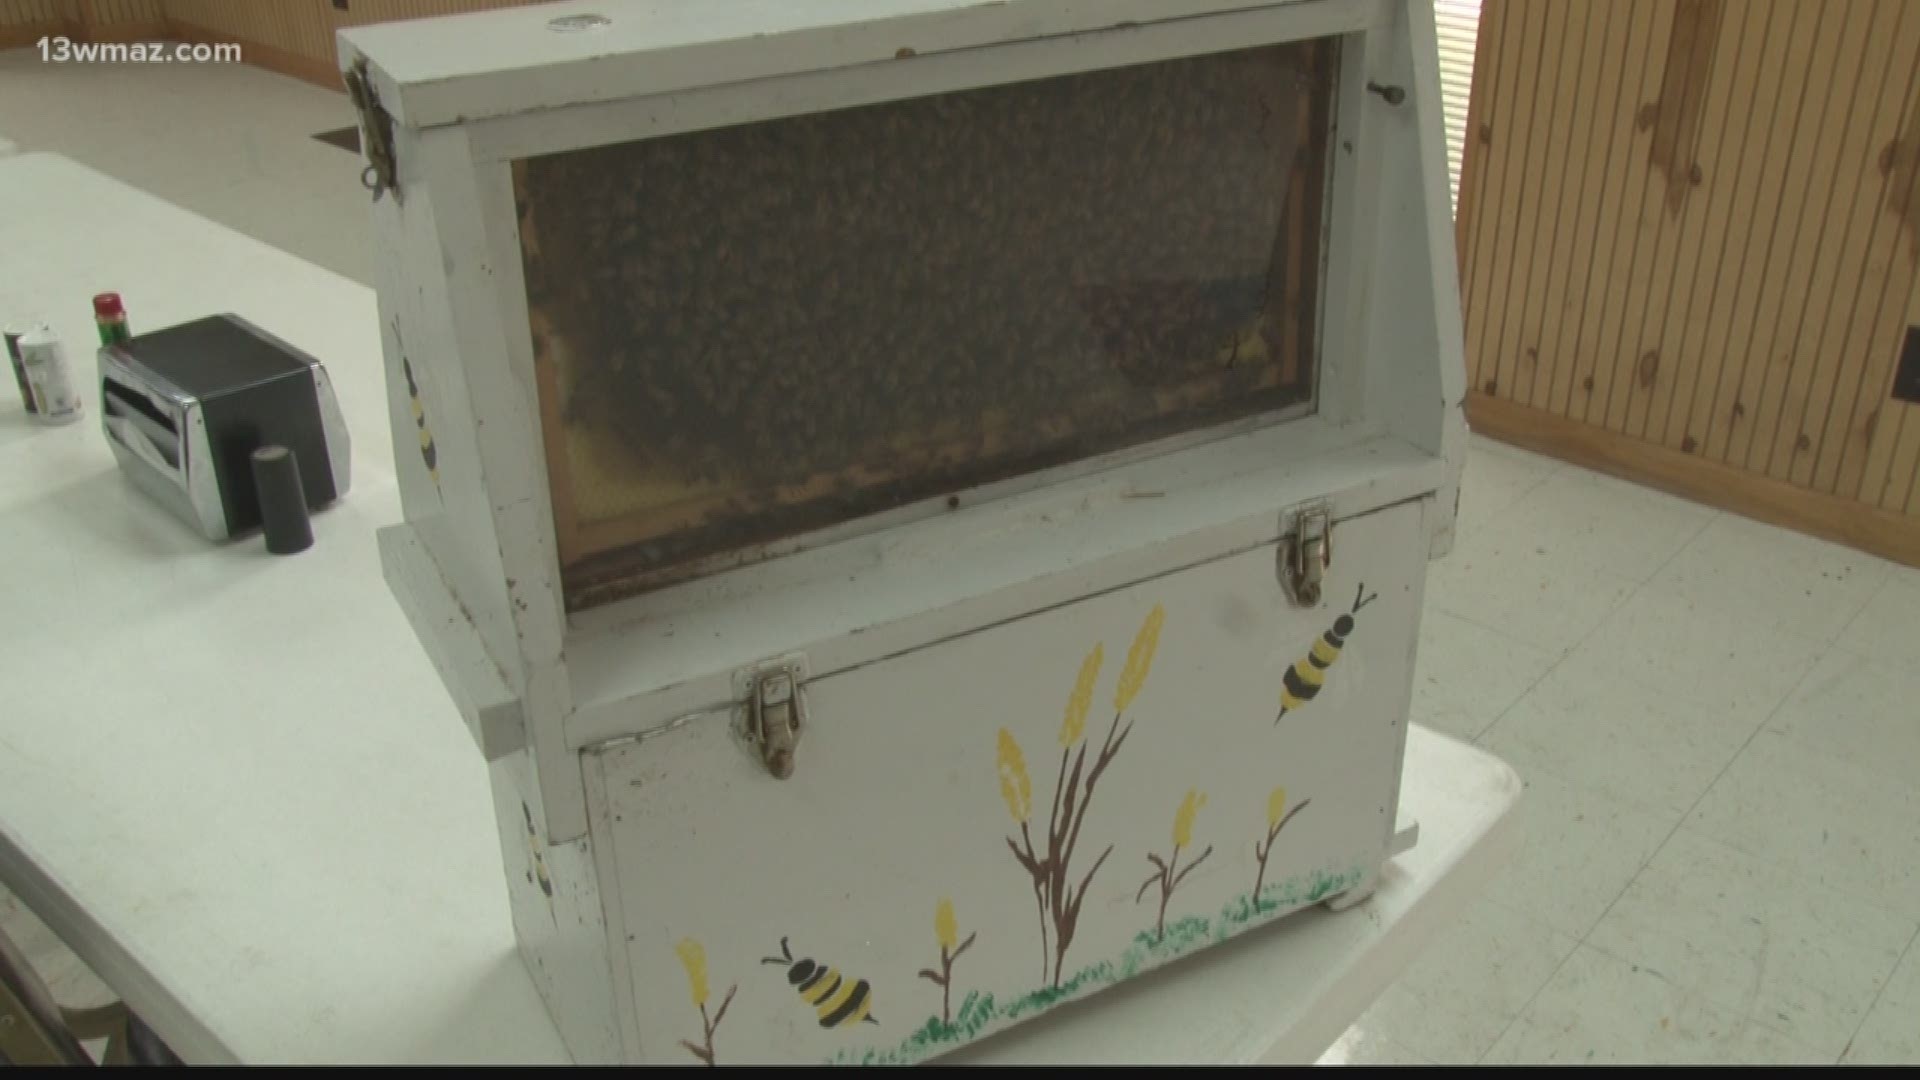 The Macon Beekeeper Association wants to make their 'bee colony' a little bigger, by giving people the buzz on becoming a beekeeper. On Saturday, people gathered around to learn and hear from different speakers in the beekeeper community.